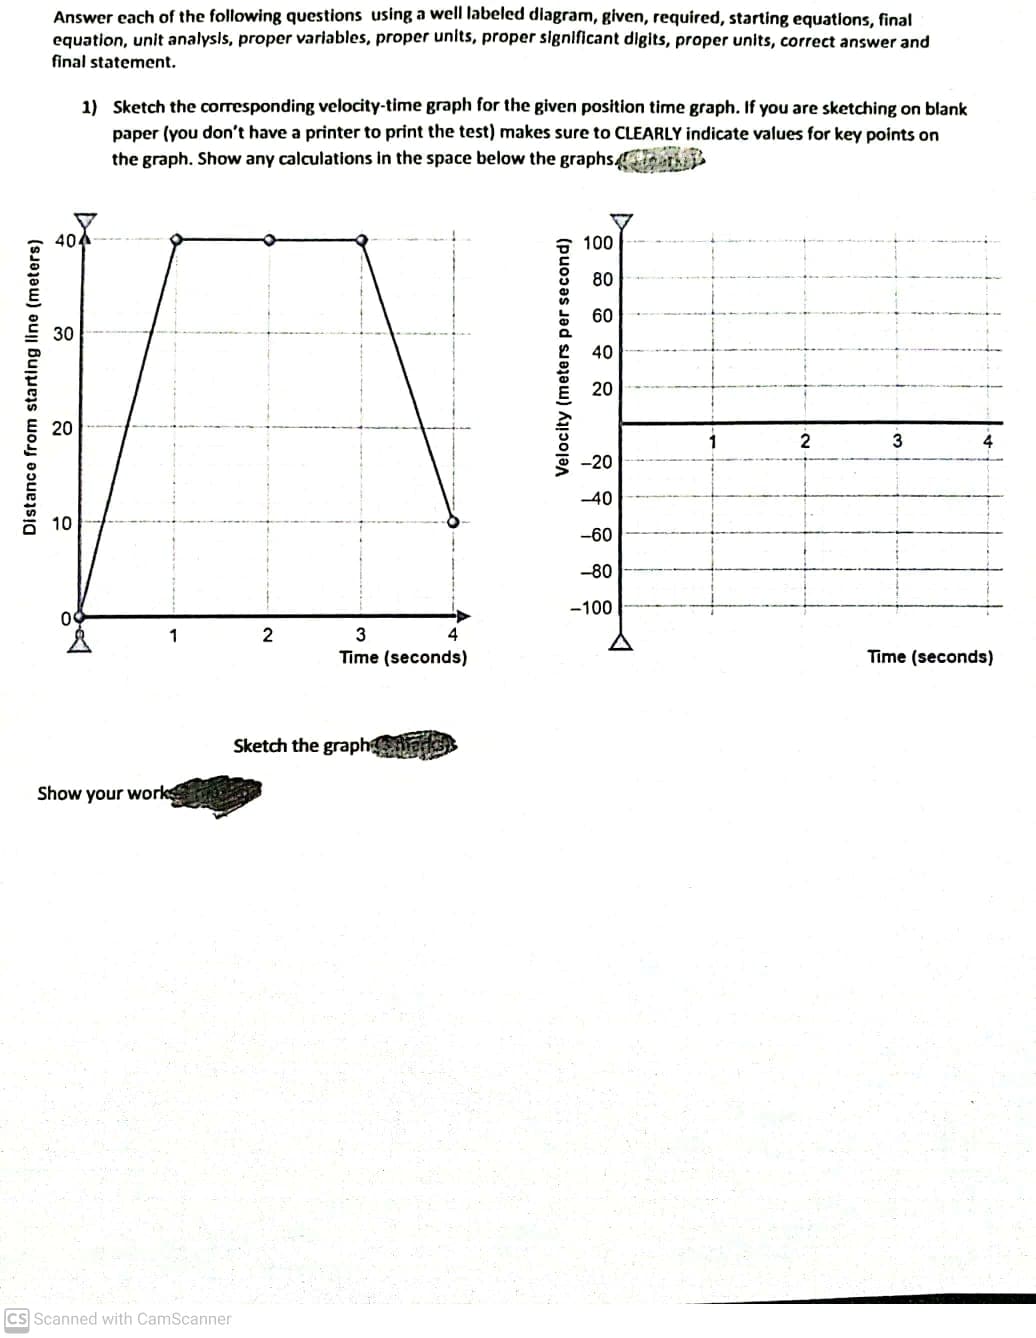 Answer each of the following questions using a well labeled diagram, given, required, starting equations, final
equation, unit analysls, proper variables, proper units, proper slgnificant digits, proper units, correct answer and
final statement.
1) Sketch the corresponding velocity-time graph for the given position time graph. If you are sketching on blank
paper (you don't have a printer to print the test) makes sure to CLEARLY indicate values for key points on
the graph. Show any calculations in the space below the graphs4oath
100
80
60
30
40
20
2
-20
-40
10
-60
-80
-100
2
3
Time (seconds)
Time (seconds)
Sketch the graph ans
Show your work
CS Scanned with CamScanner
Distance from starting line (meters)
20
Velocity (meters per second)
